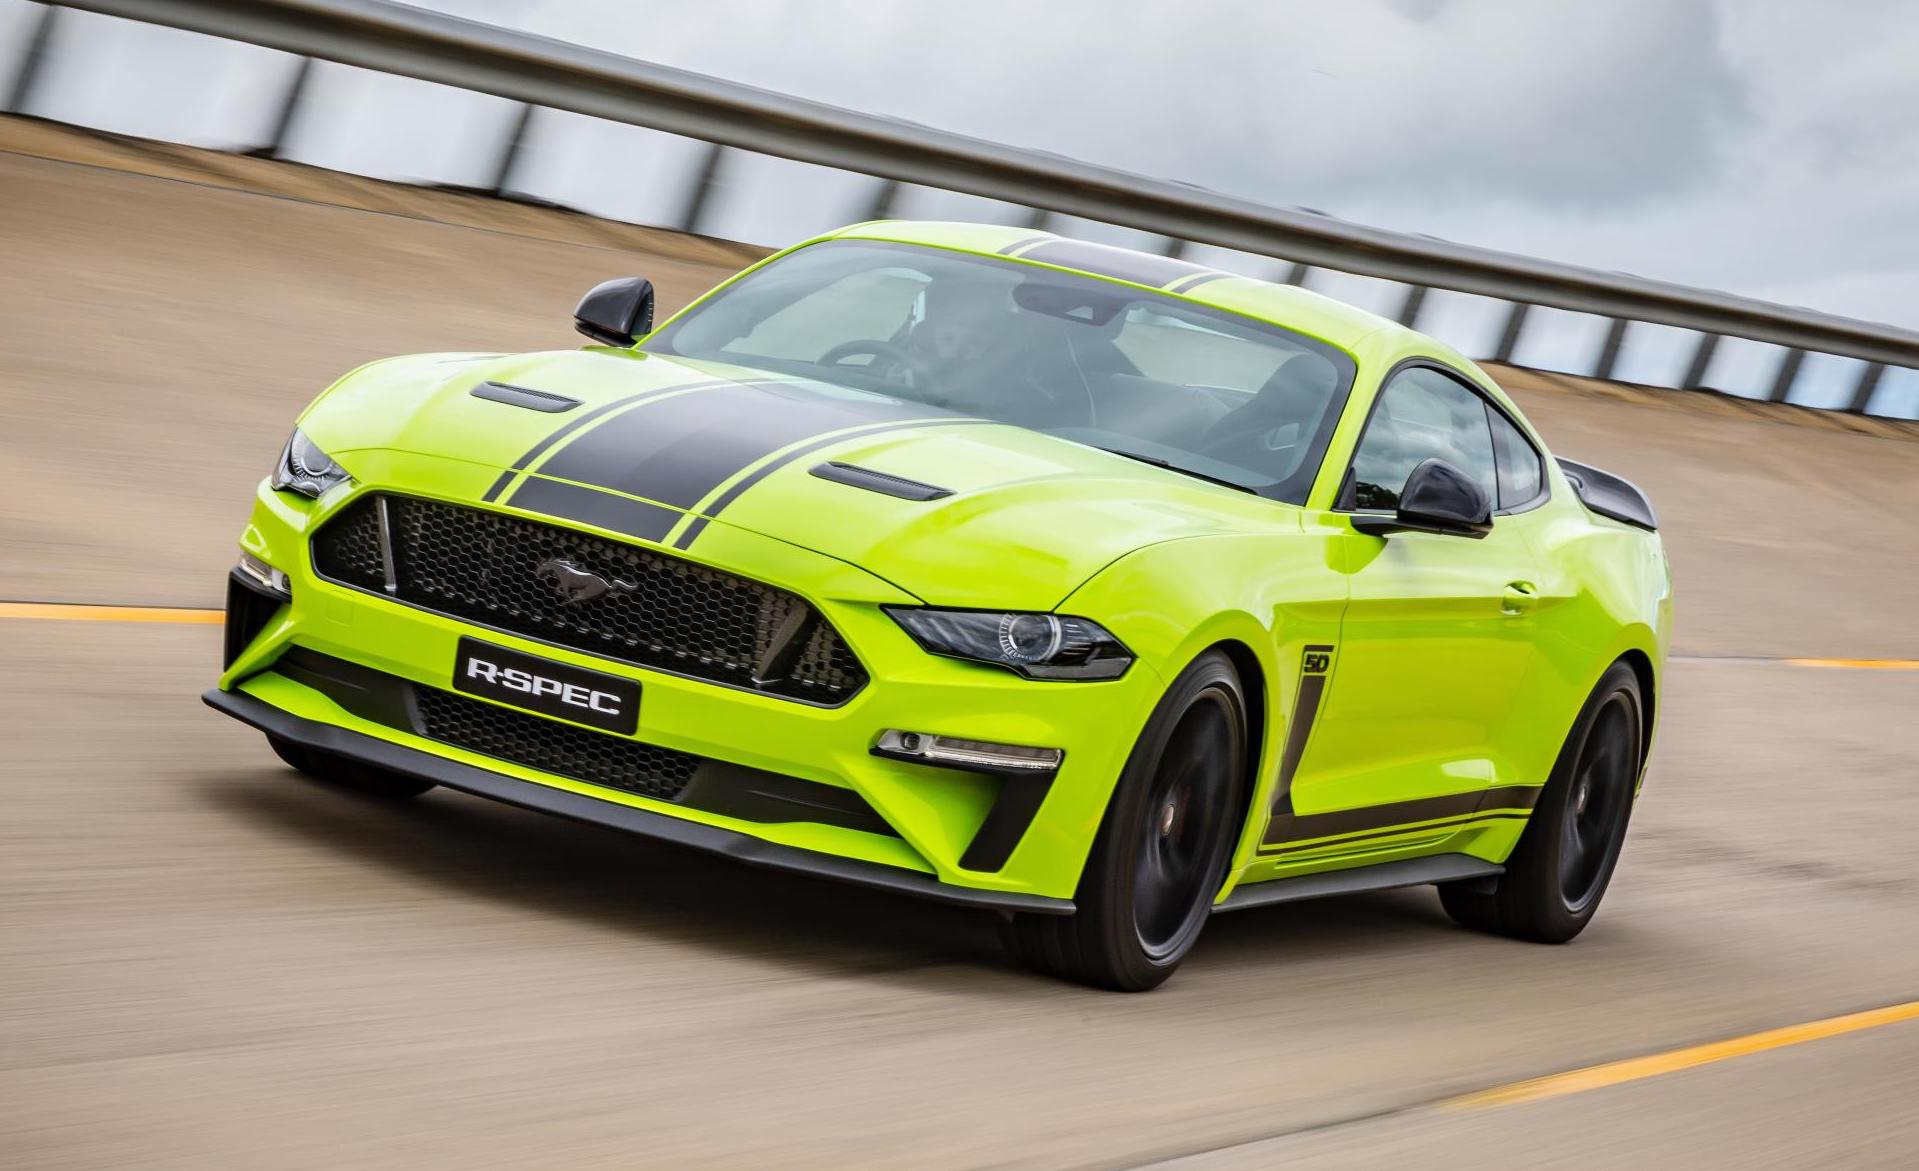 Supercharged Ford Mustang R-SPEC on sale in Australia – PerformanceDrive